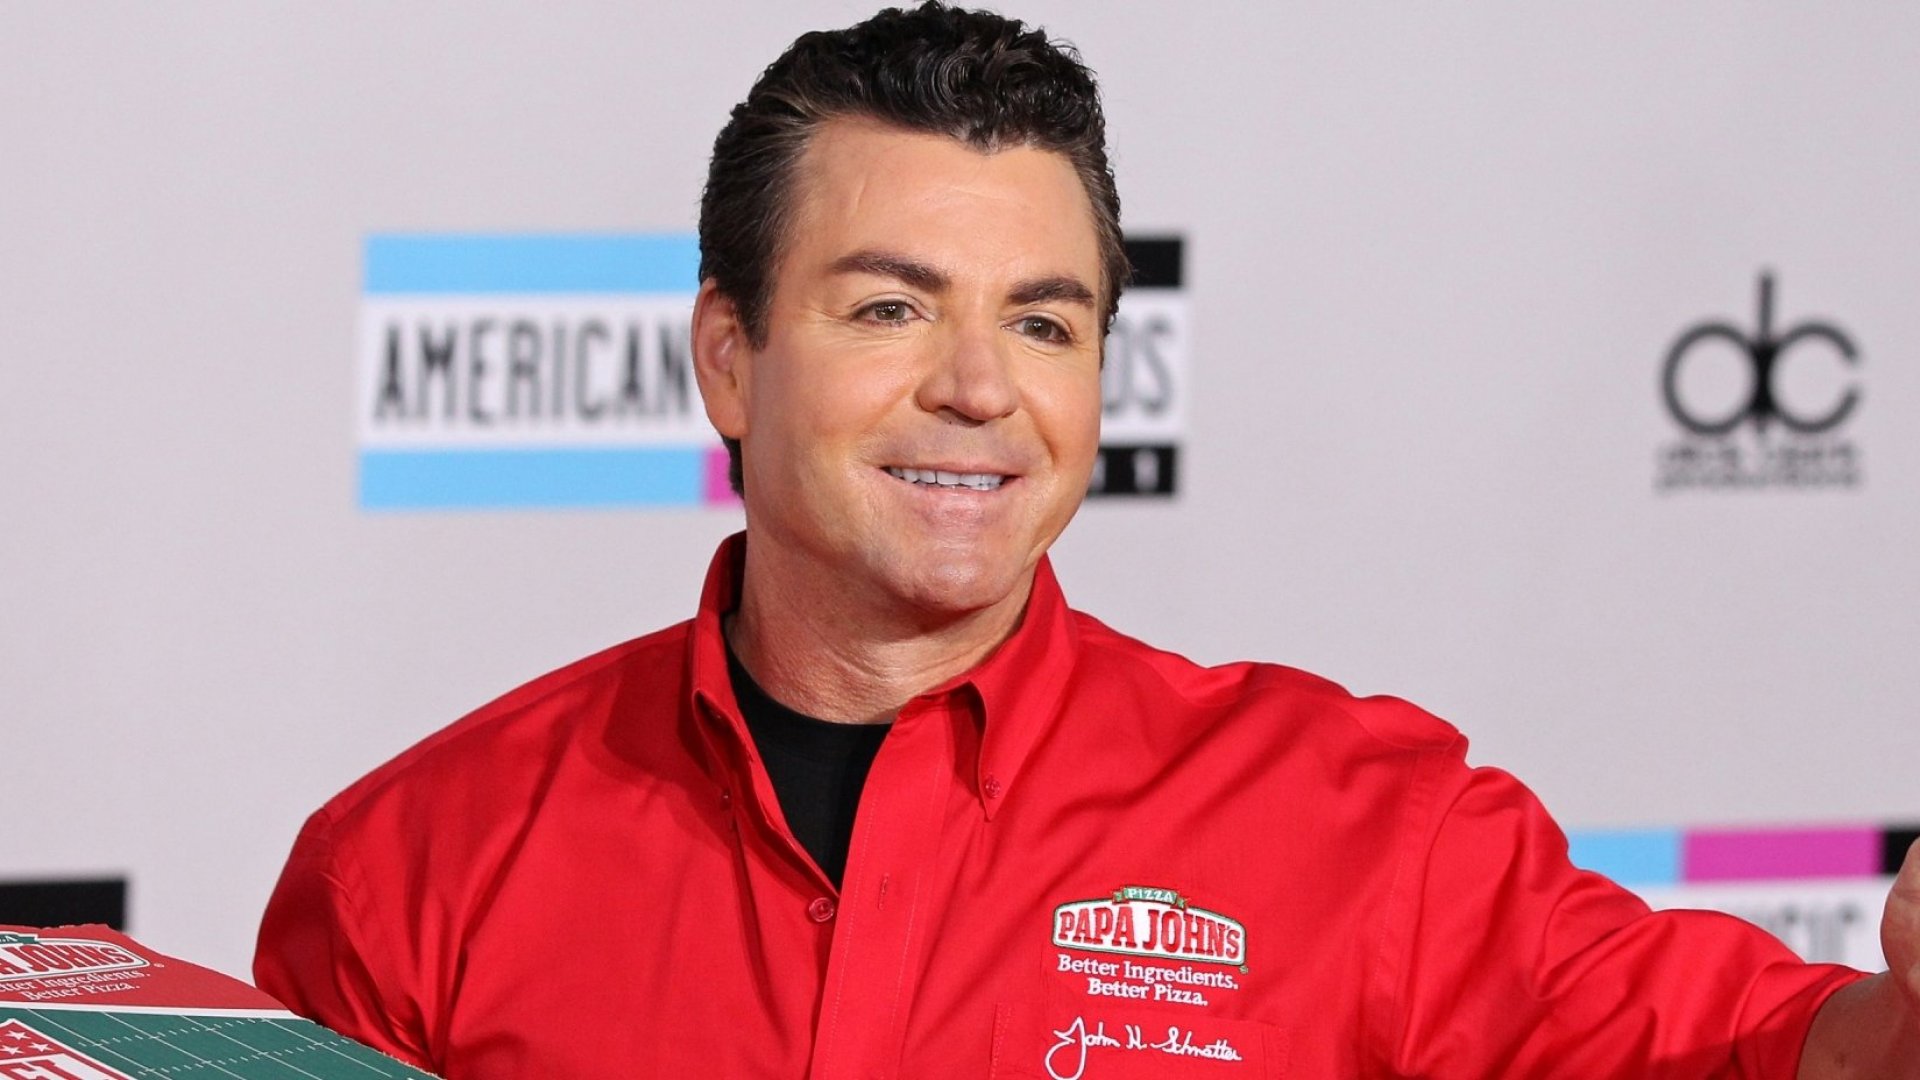 Papa John's Founder Affirms He's Not Racist: For 20 Months I've Been Scrubbing The N-Word From My Vocabulary